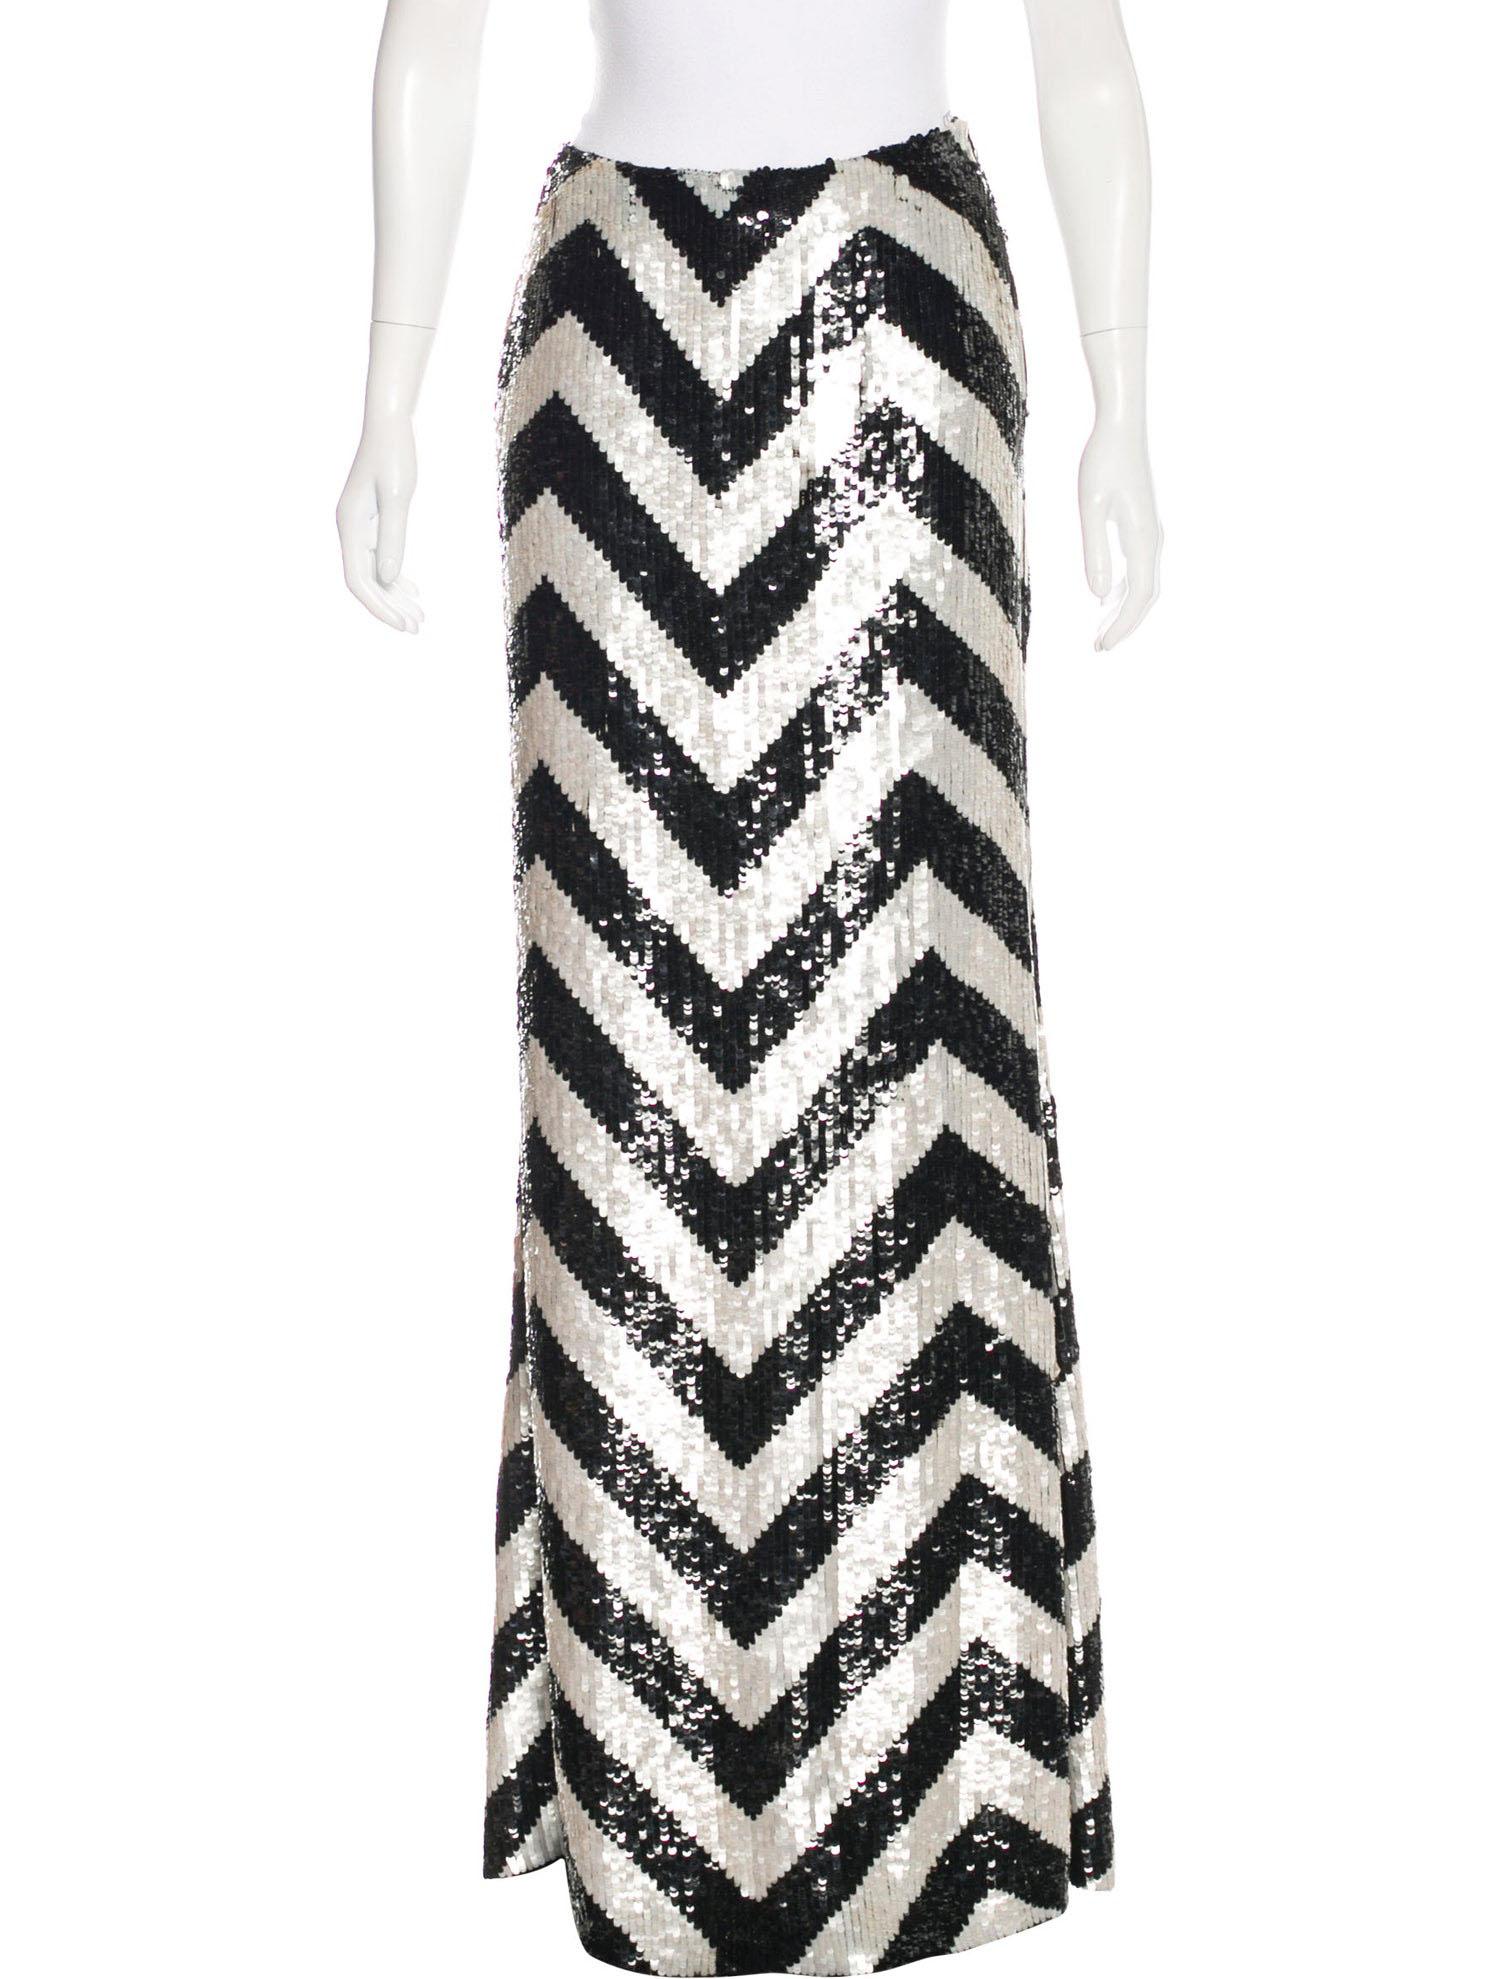 Valentino Sequin Silk Chevron Pattern Long Skirt
Designer size  44 - US 6
100% Silk, White and Black Sequins, Chevron Pattern, Fully Lined, Side Zip Closure.
Measurements: Length - 45 inches, Waist - 28 inches.
Made in Italy
Excellent